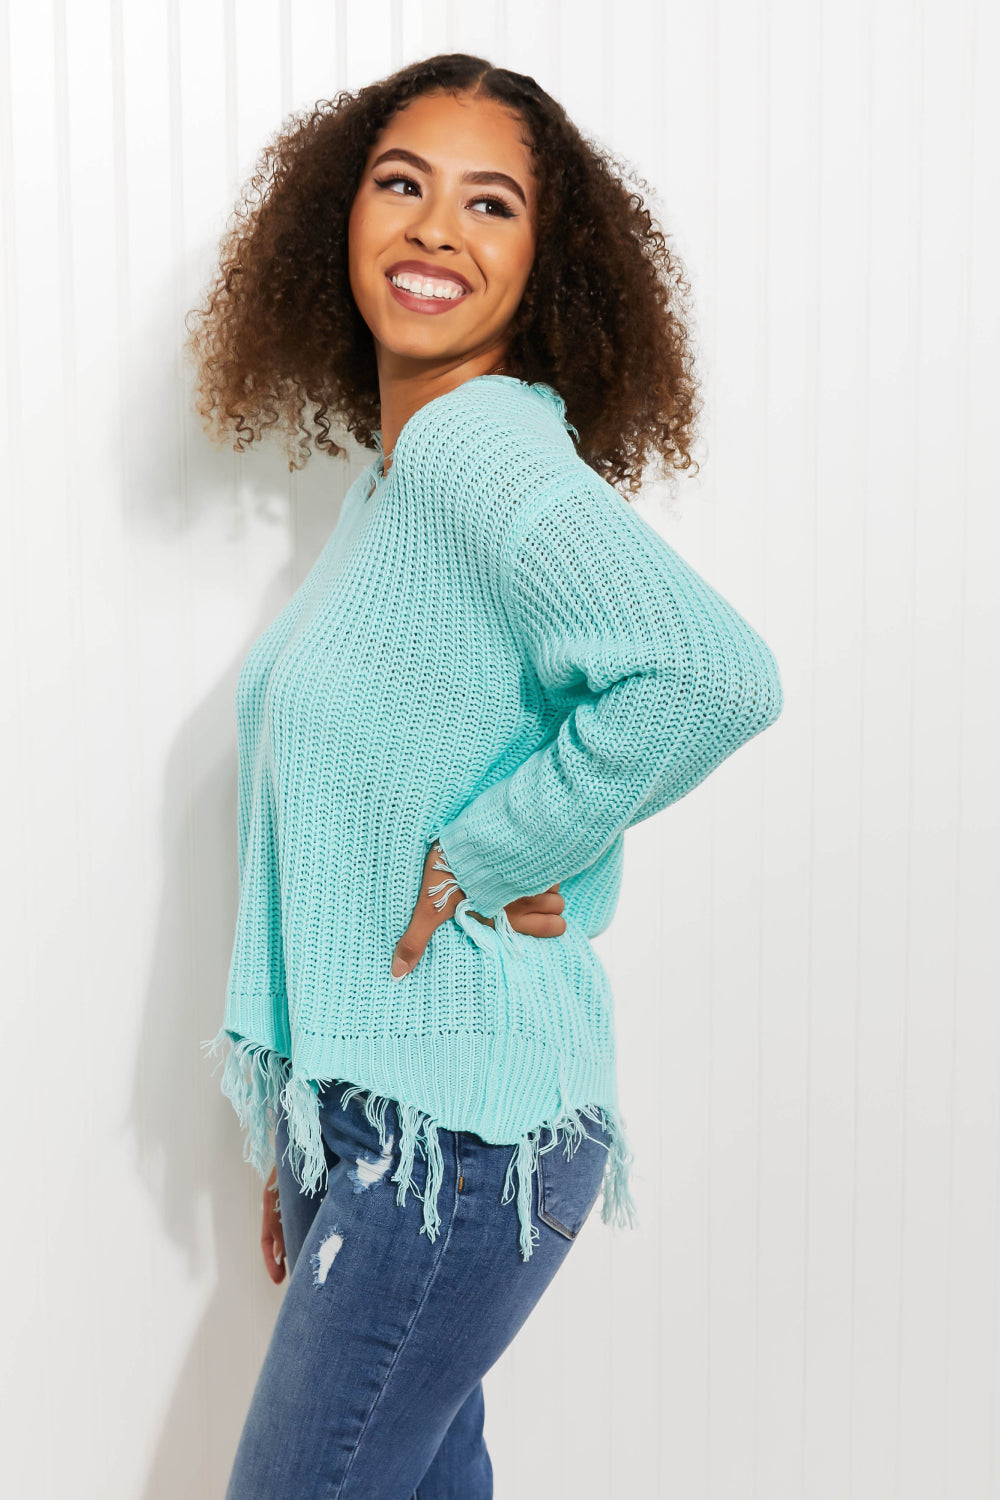 Sew In Love Uptown Girl Full Size Distressed Sweater